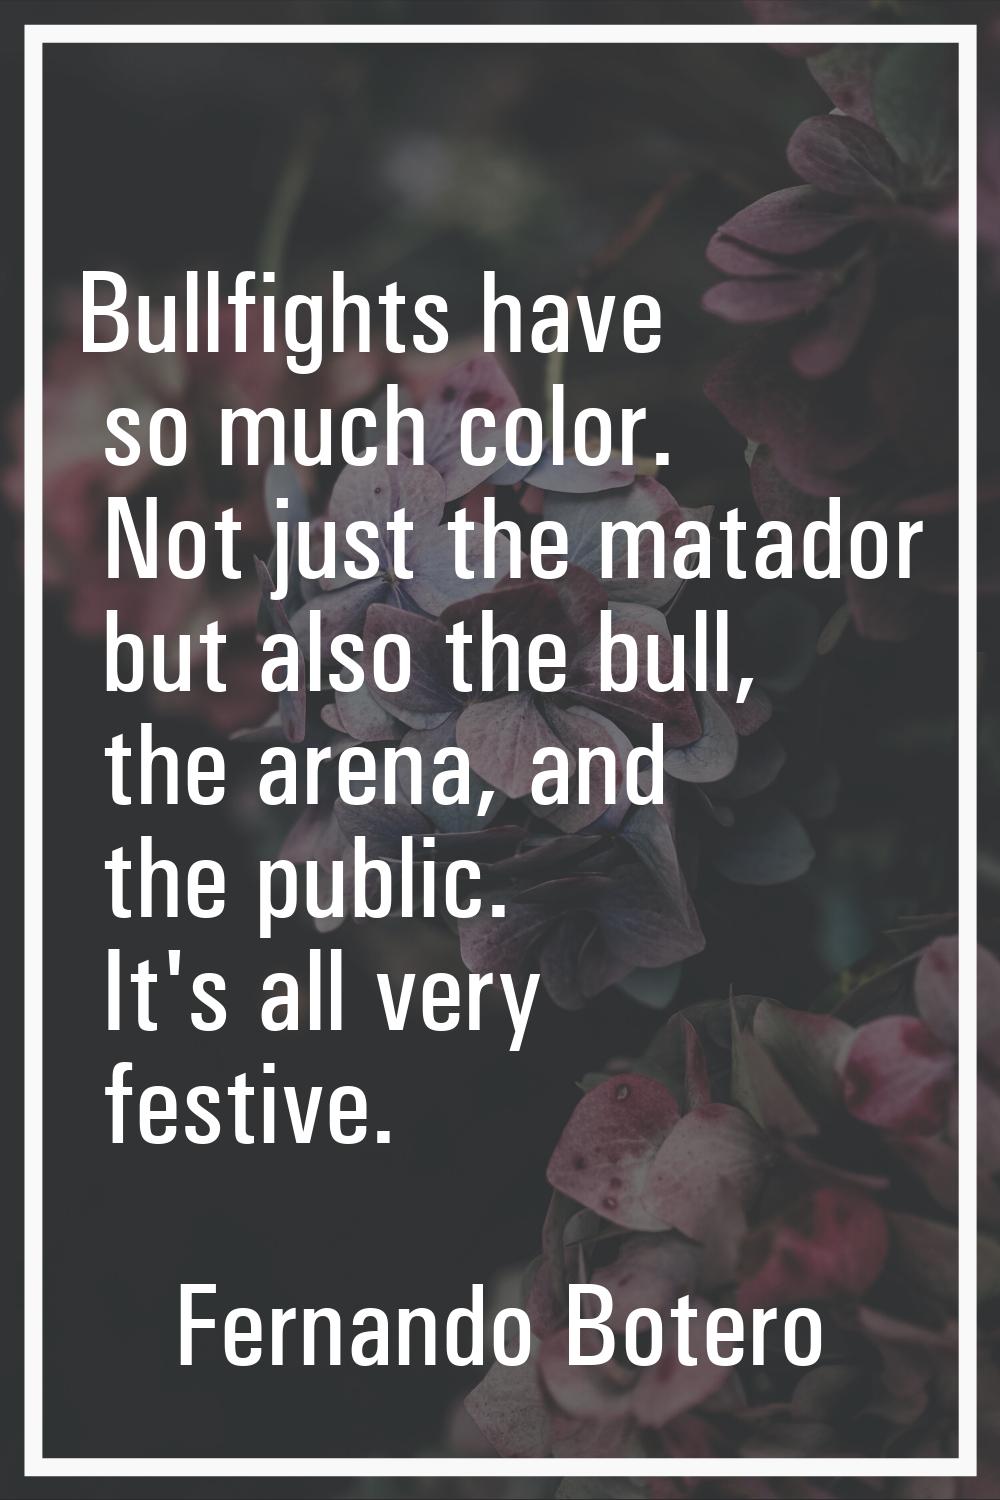 Bullfights have so much color. Not just the matador but also the bull, the arena, and the public. I